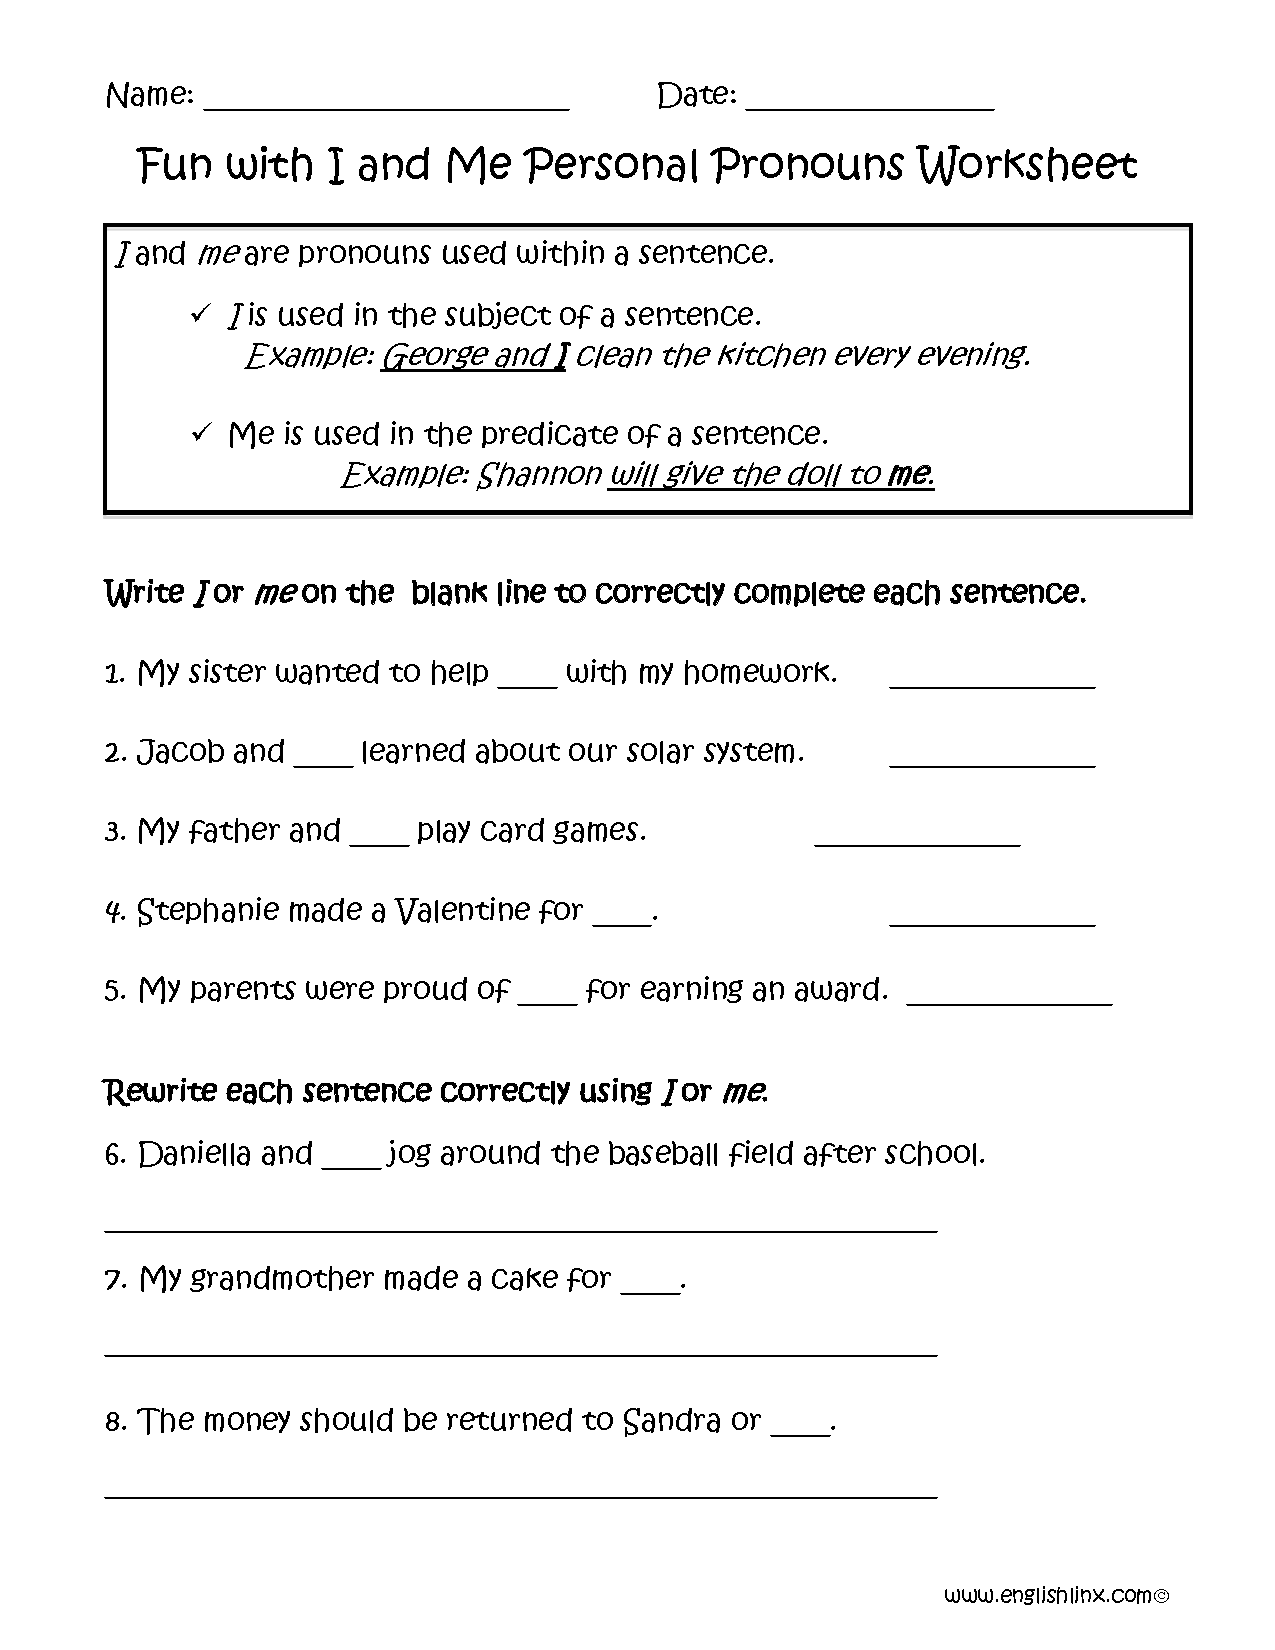 Fun I or Me Personal Pronouns Worksheets